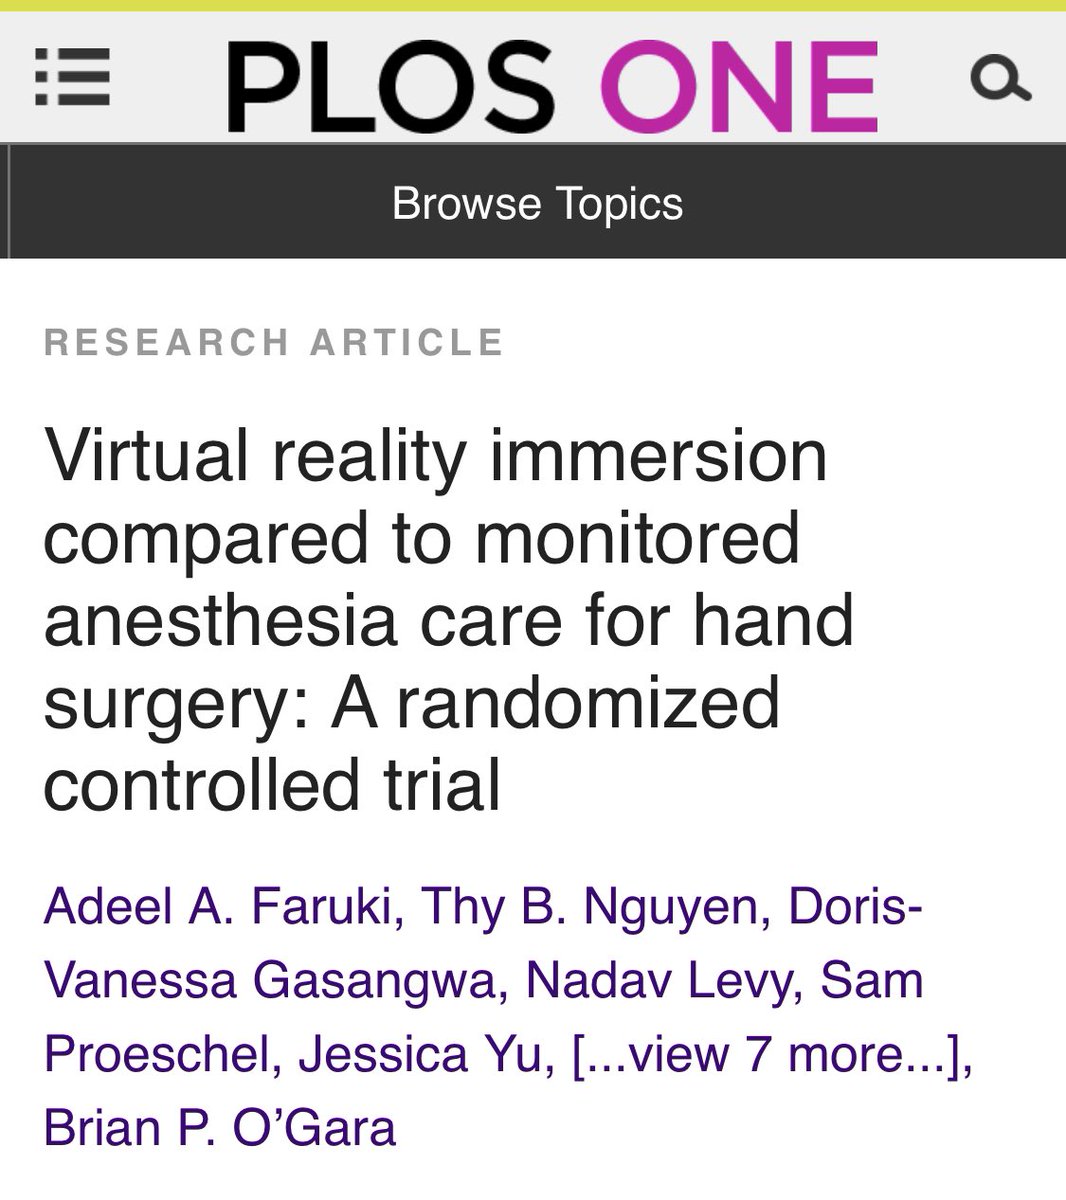 Thrilled to share that the manuscript from our trial of VR during hand surgery has been published! Grateful for the support of my coauthors and the BIDMC Center for Anesthesia Research Excellence. @BIDMCAnesthesia journals.plos.org/plosone/articl…